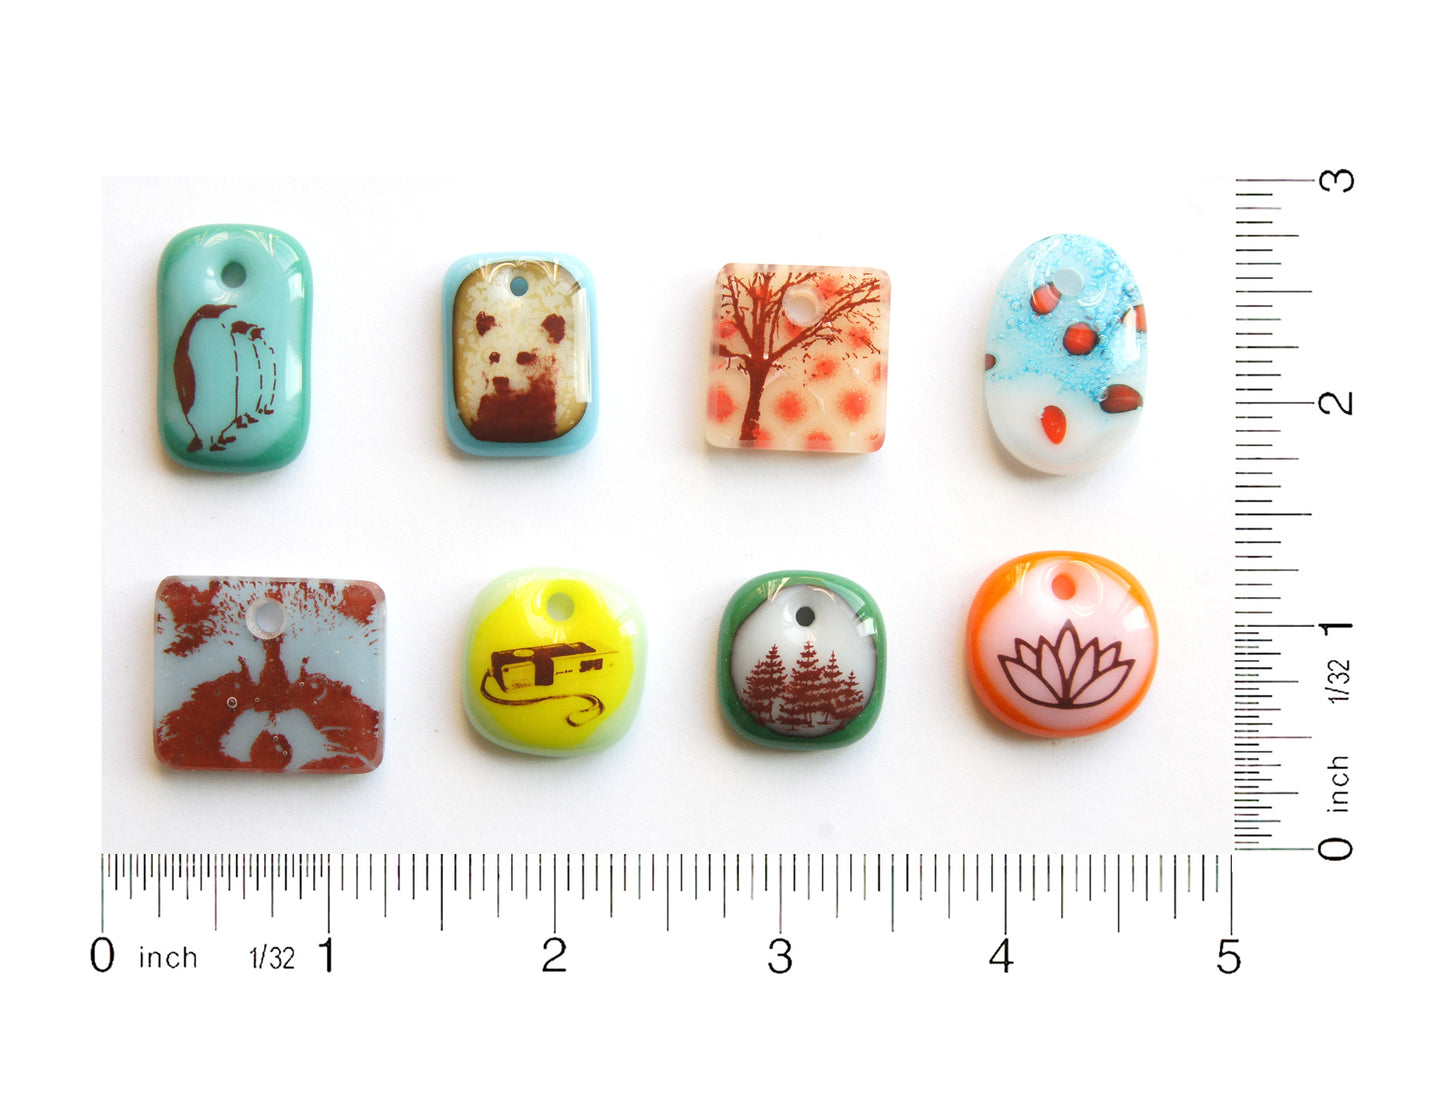 Eight handmade glass pendants with ruler to show size. 